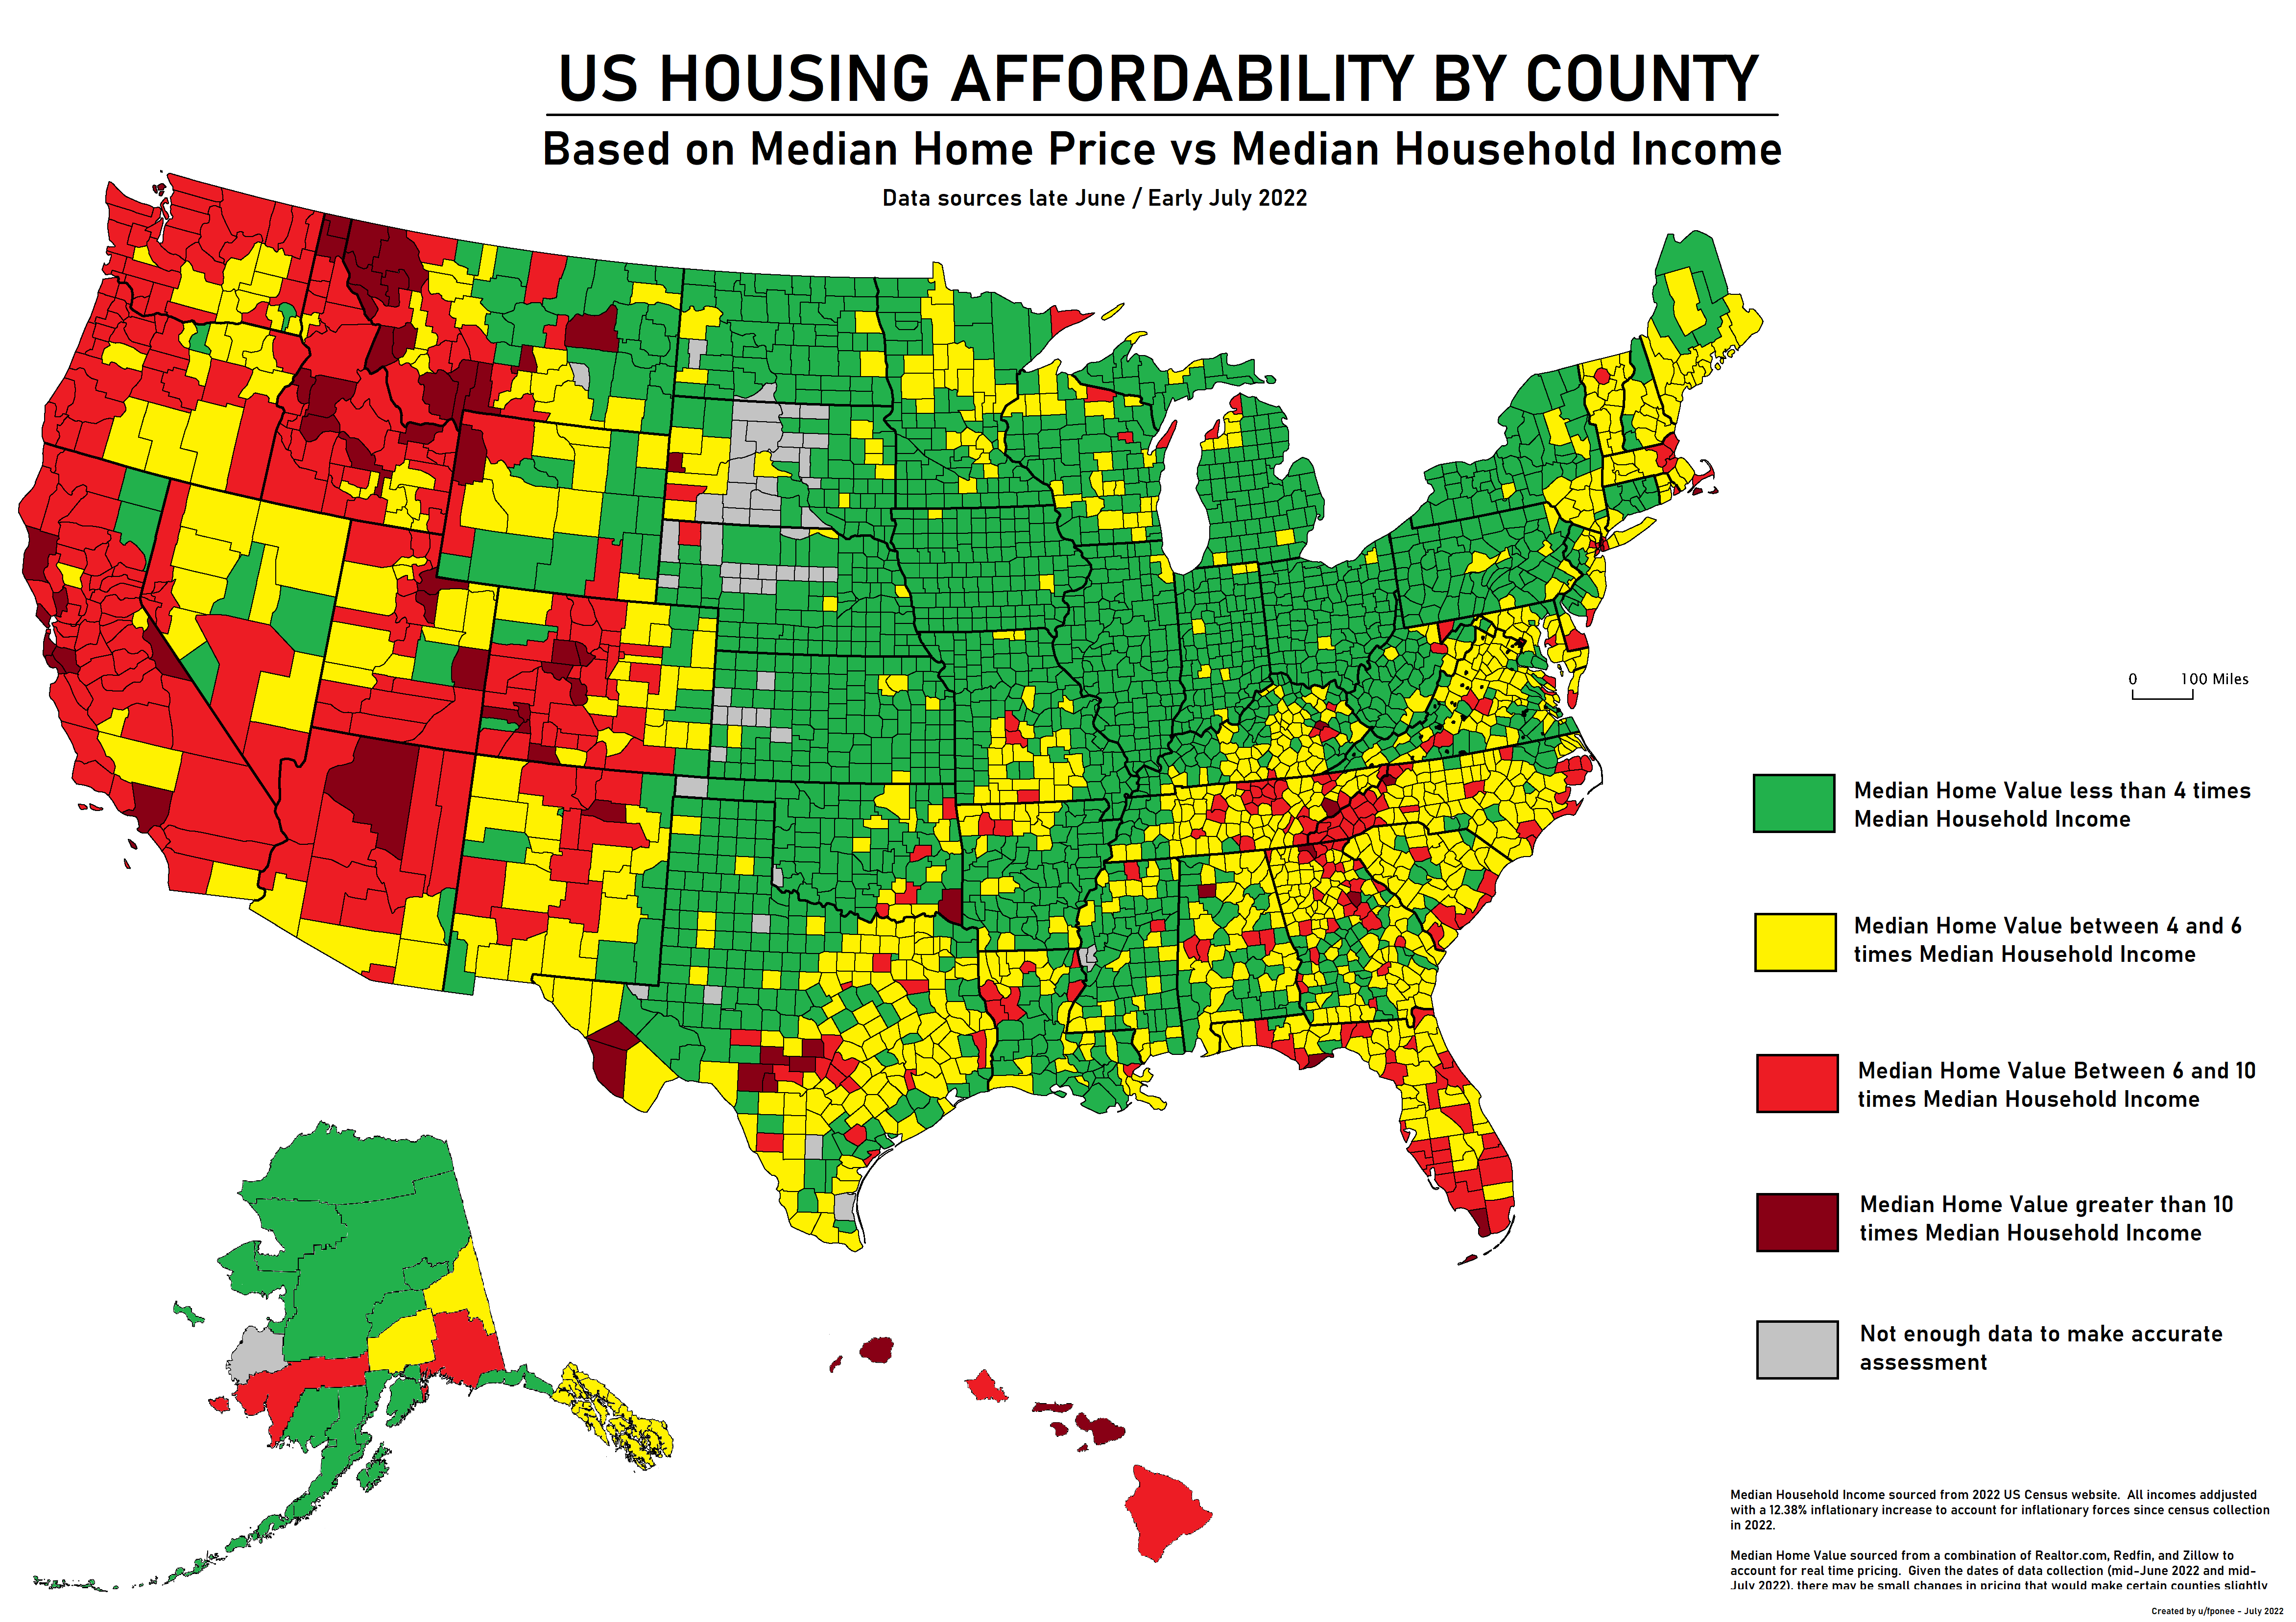 Homes Still Affordable In Majority of Counties